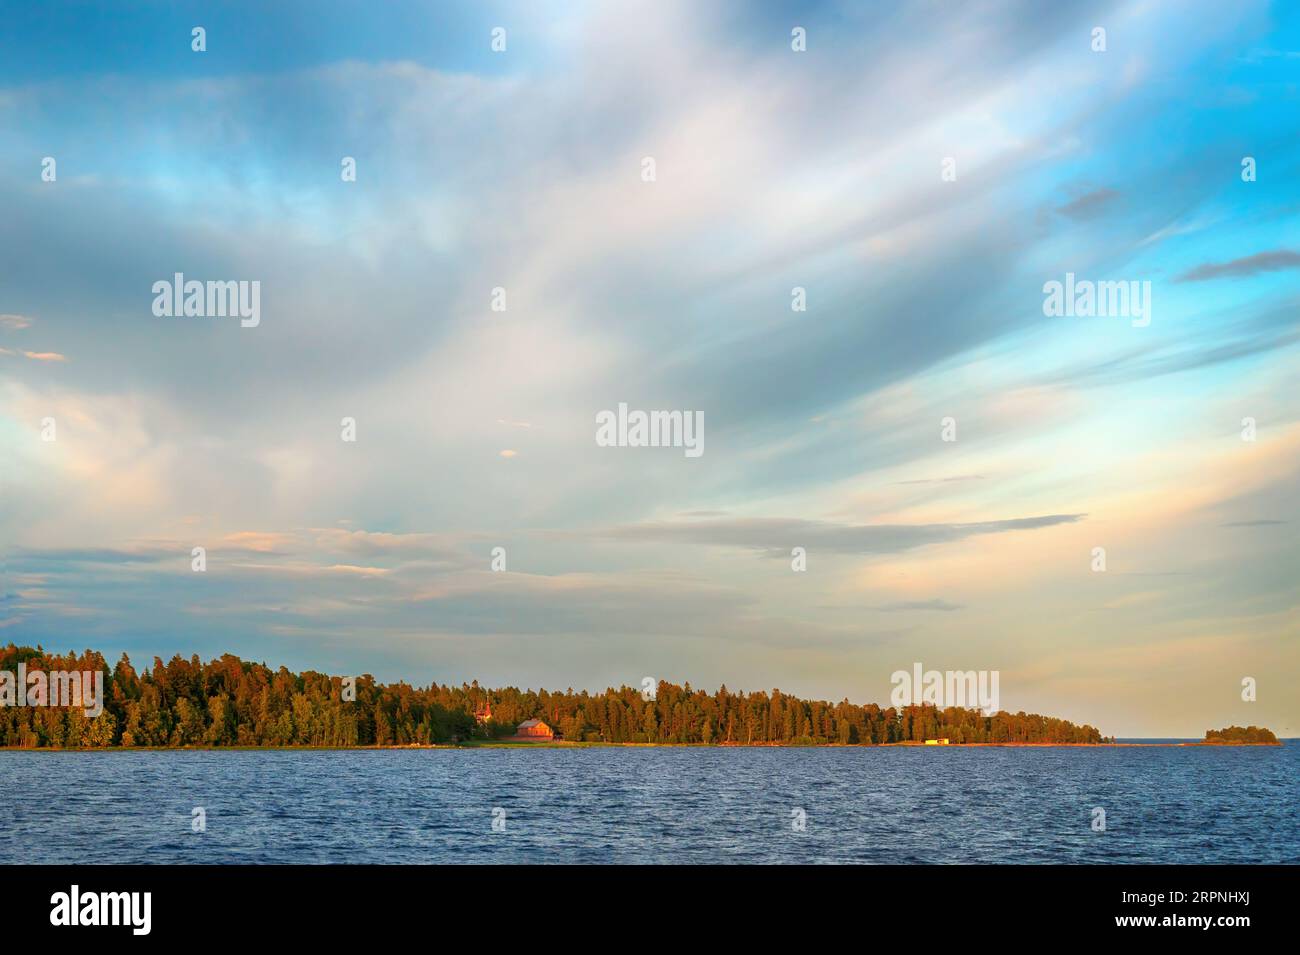 View of Konevets Island, Konevsky Skete at sunset from Lake Ladoga. Stock Photo